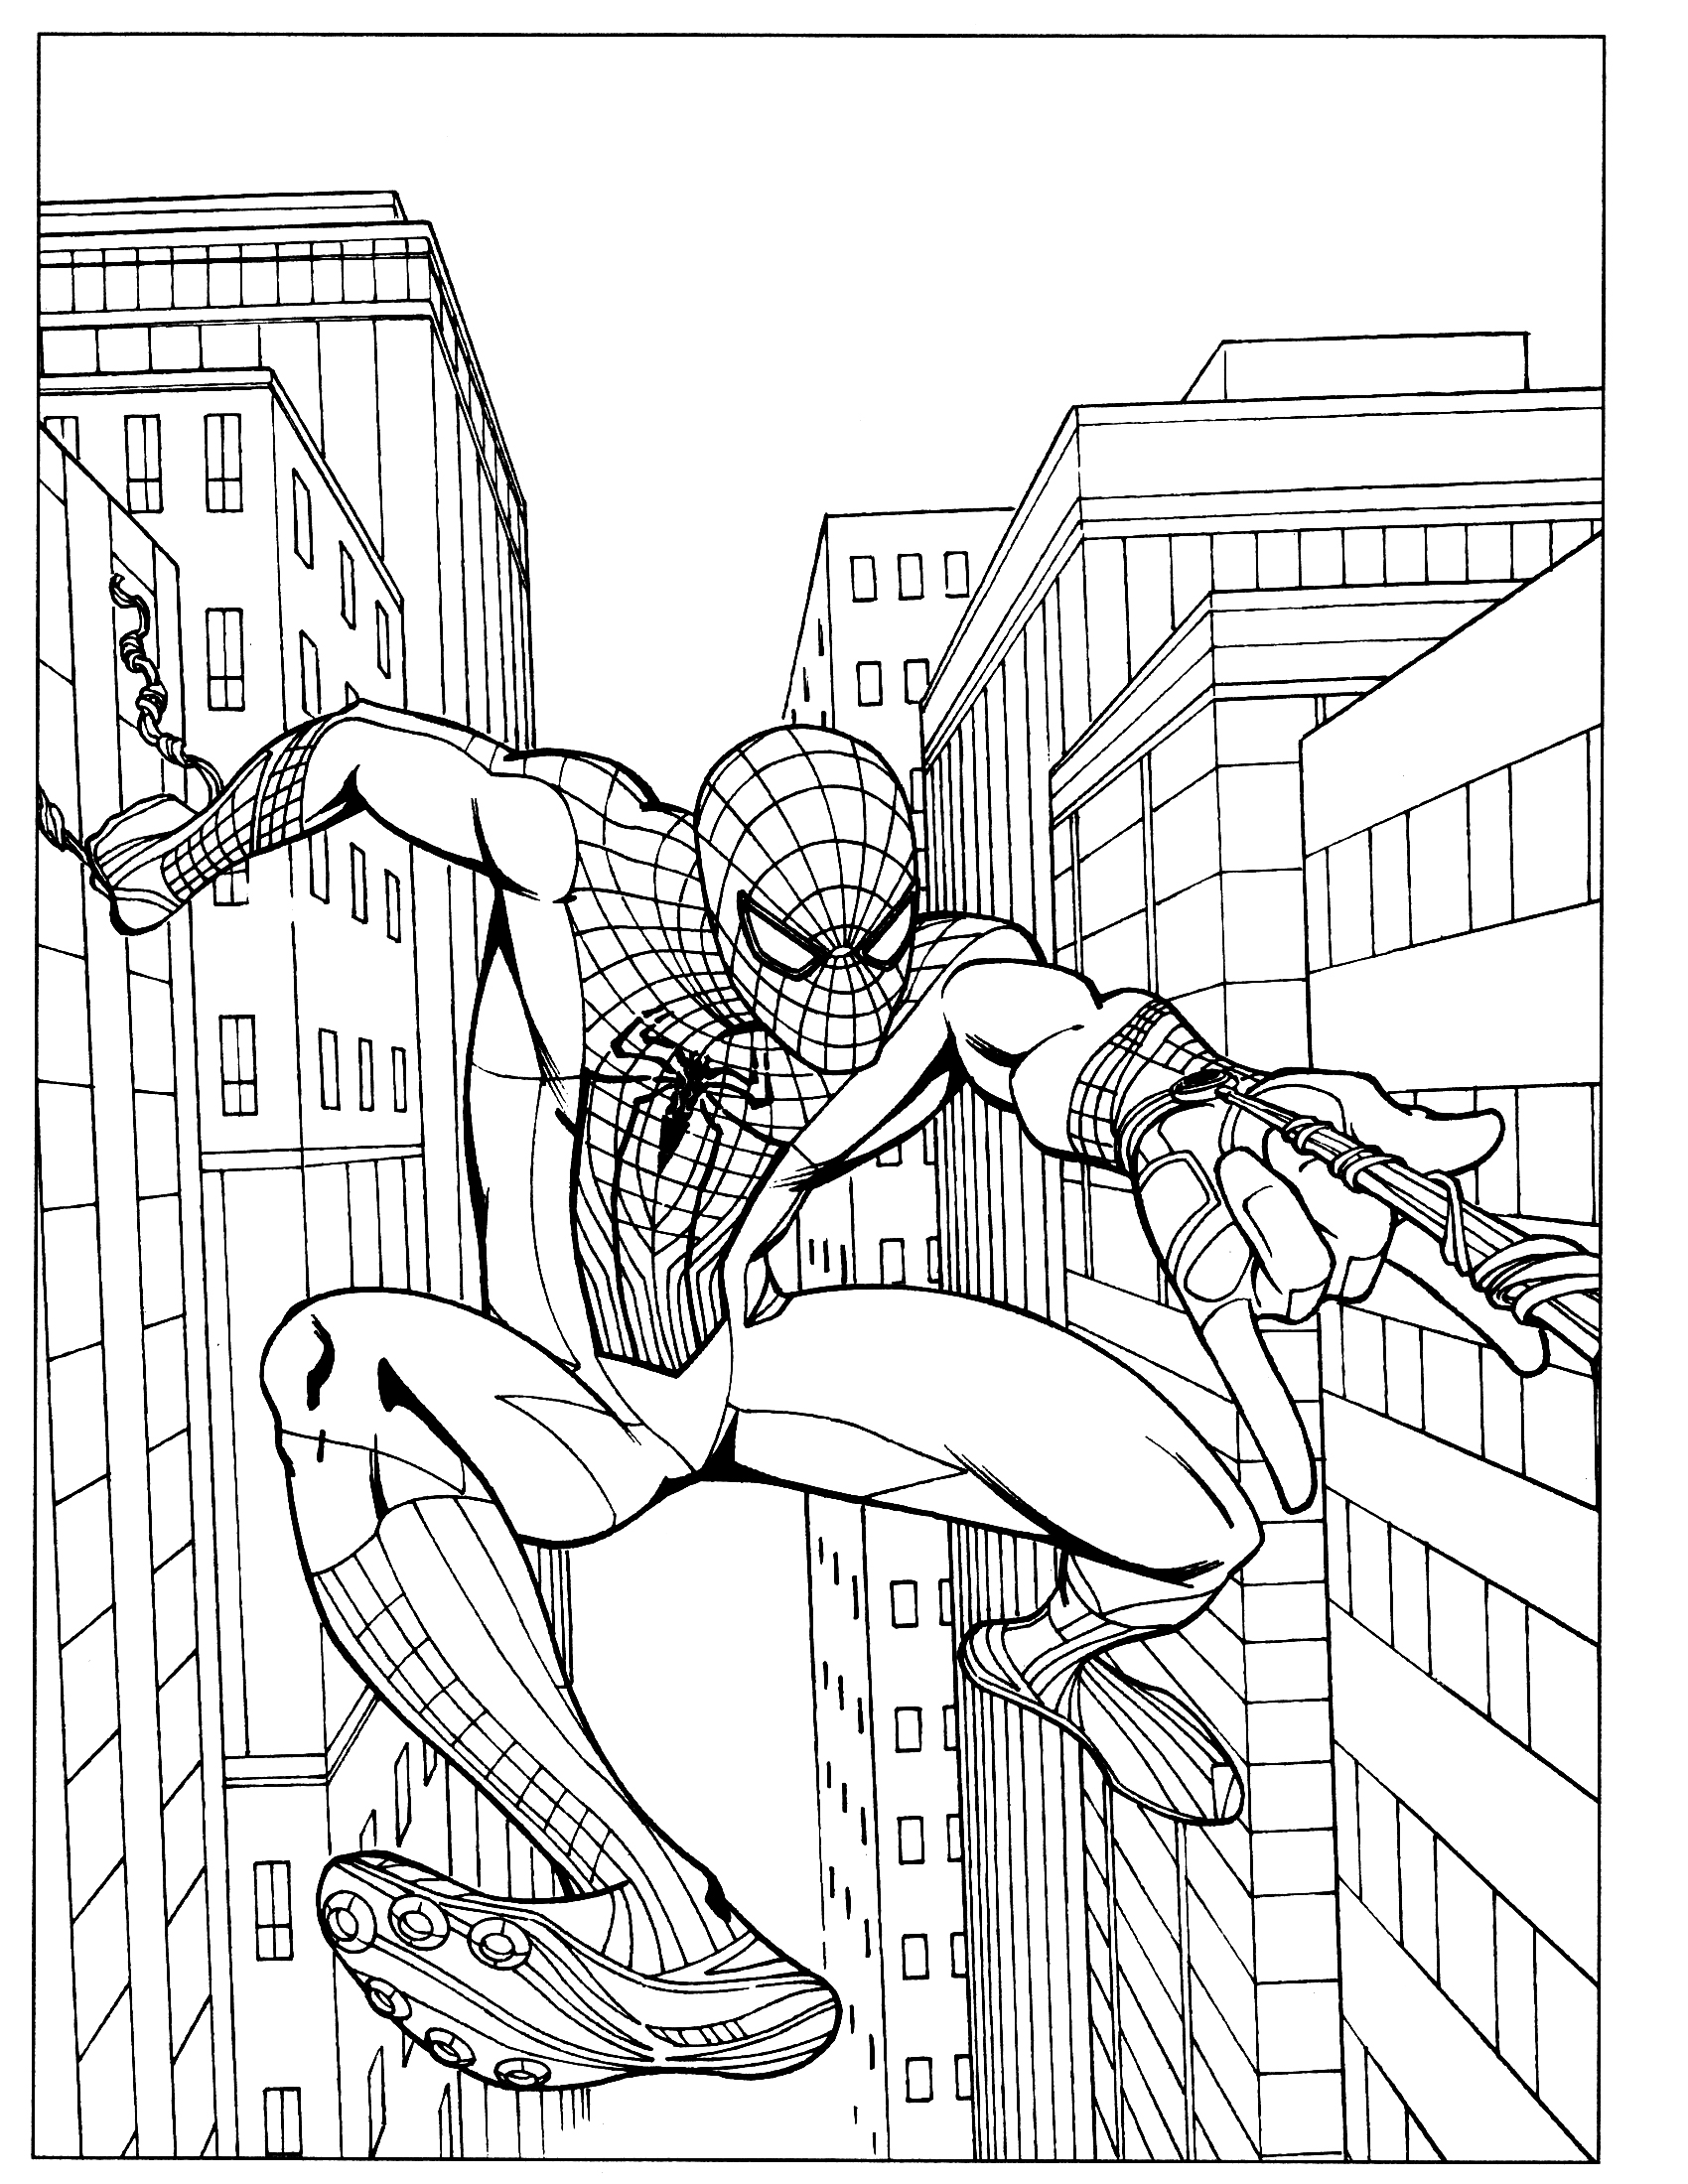 Tom Holland Coloring Spiderman Ps4 Spider Man Spiderman Ps4 Coloring Pages  Coloring page iguana for coloring kids playing marbles bird pictures to  color transportation activities for toddlers fox coloring sheet Be smart